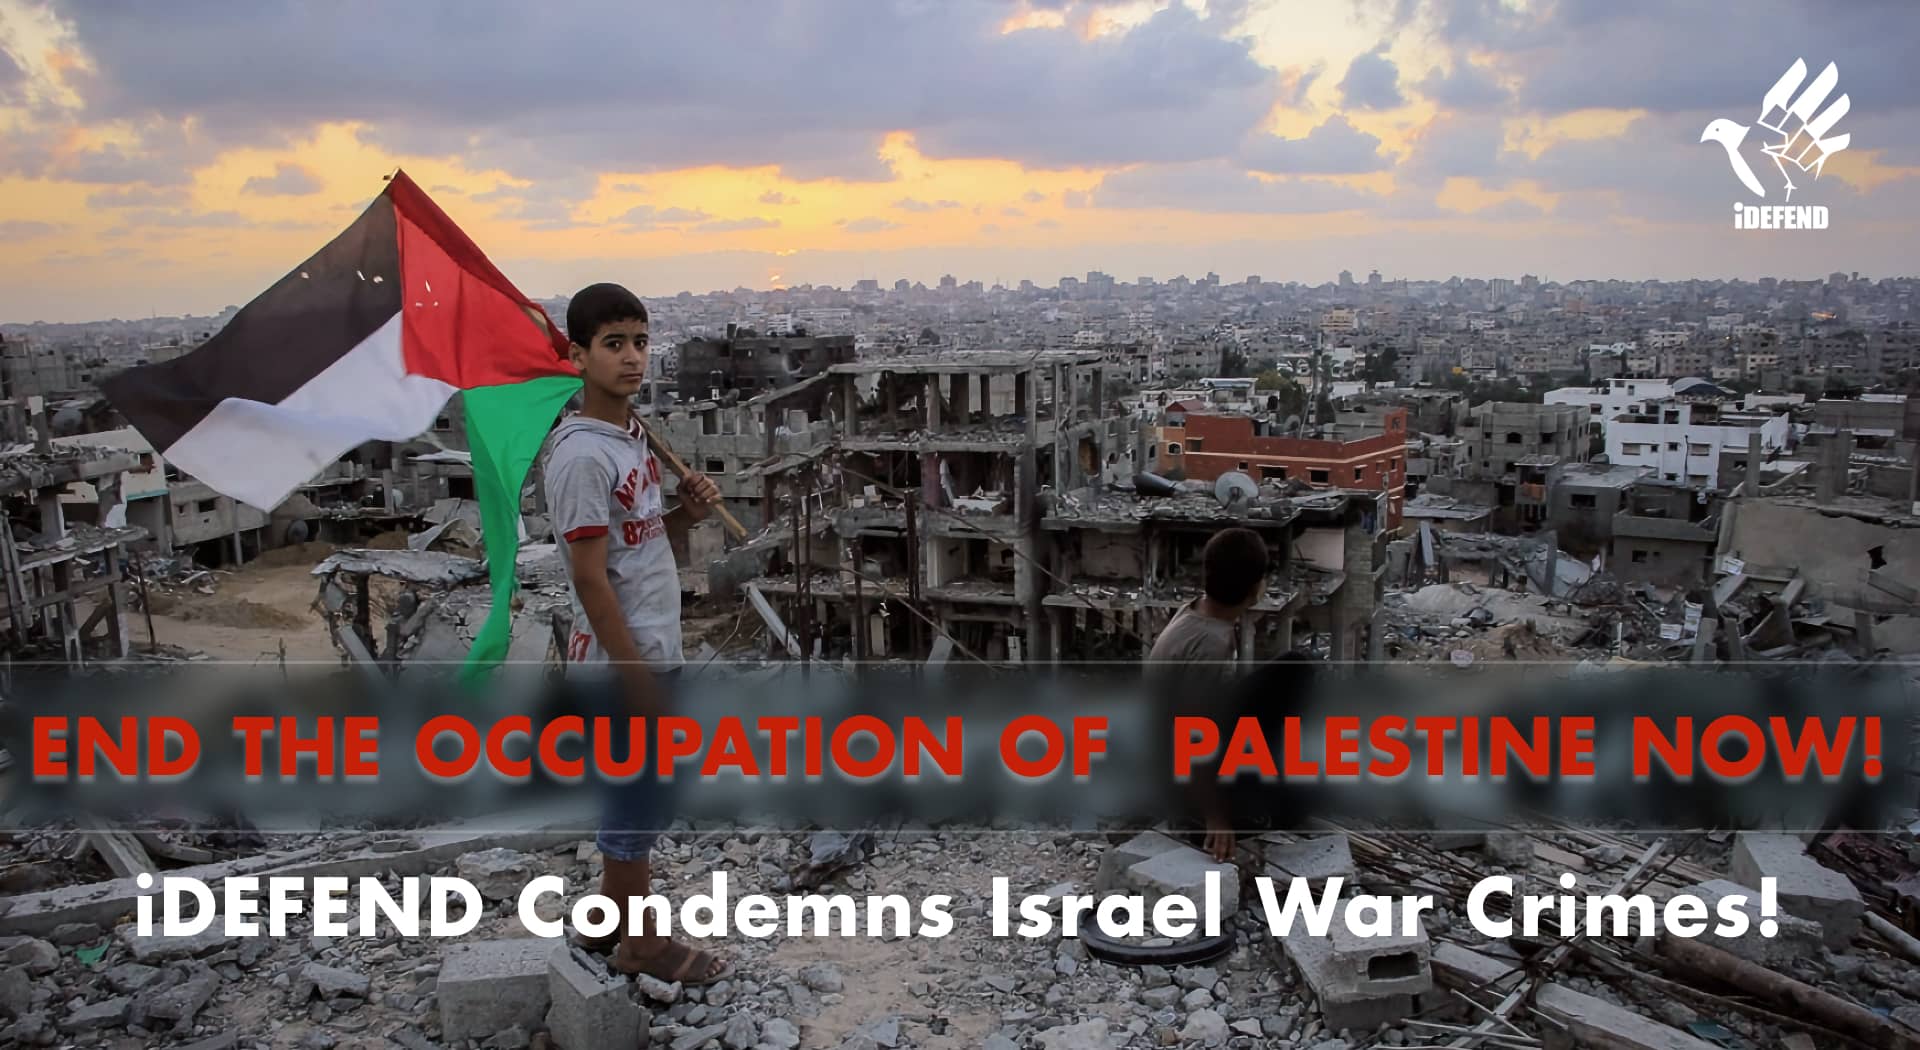 End the occupation of Palestine now!